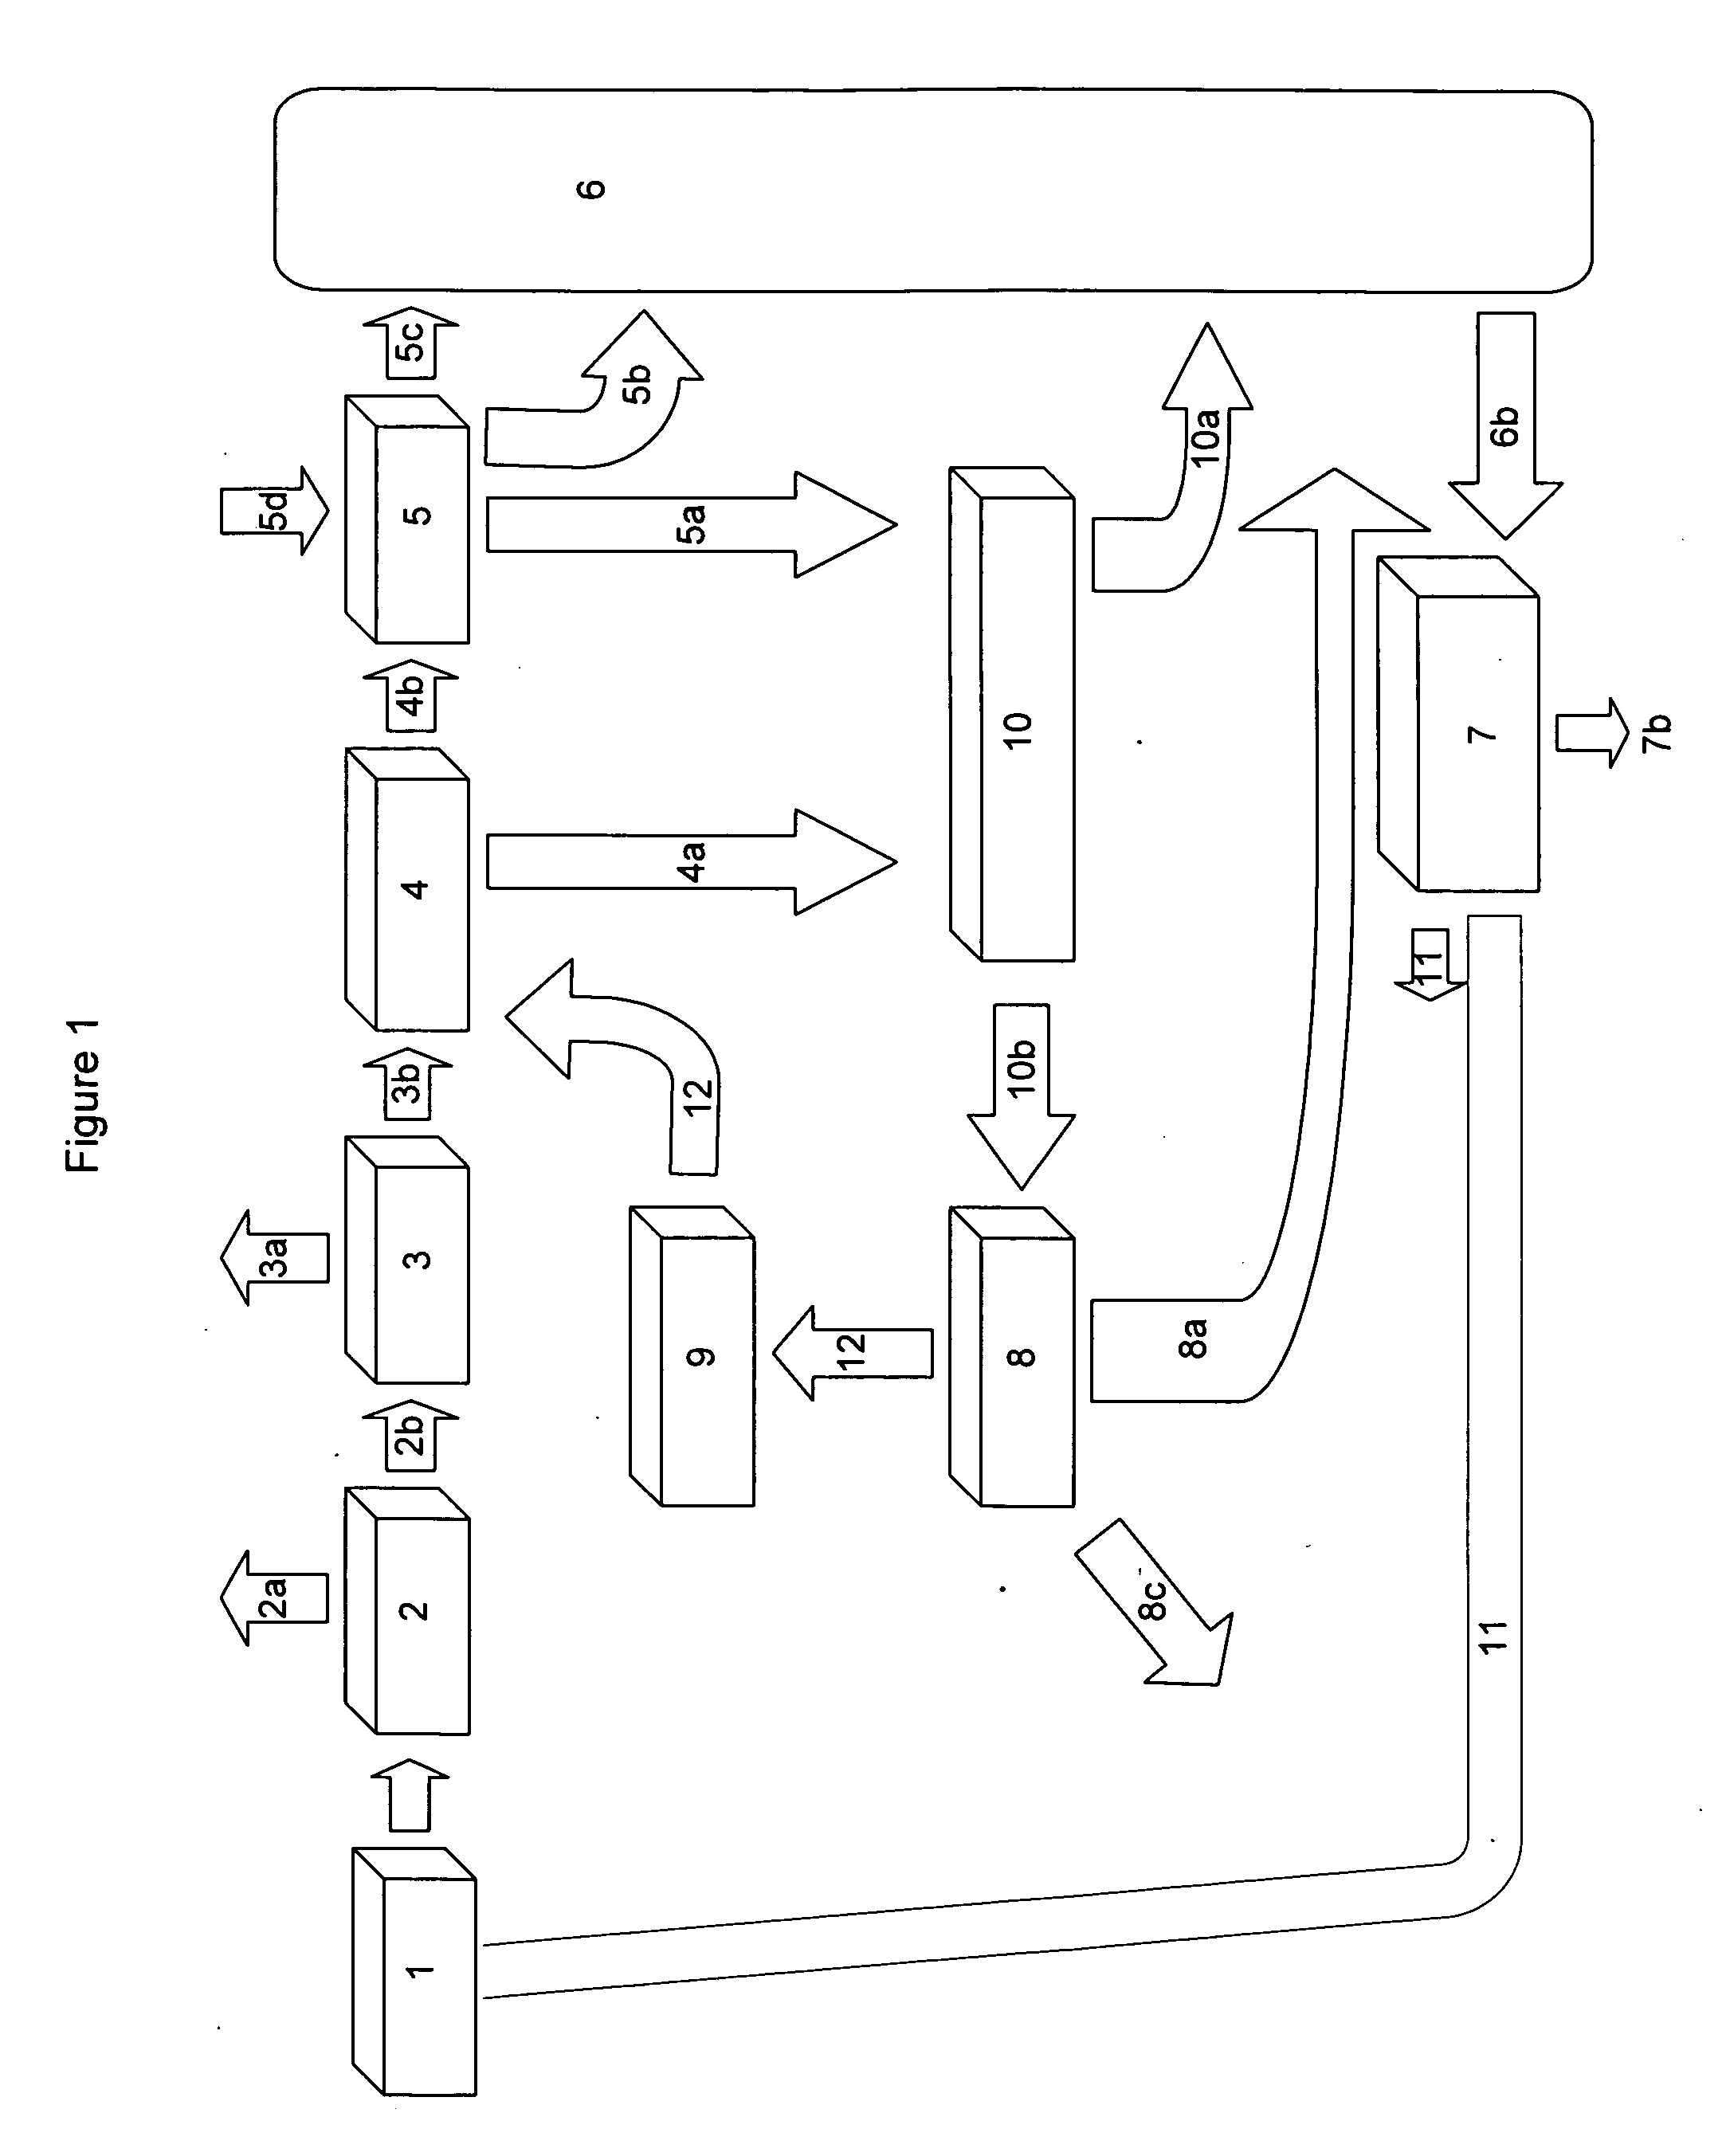 Methods and Systems for Biomass Recycling and Energy Production